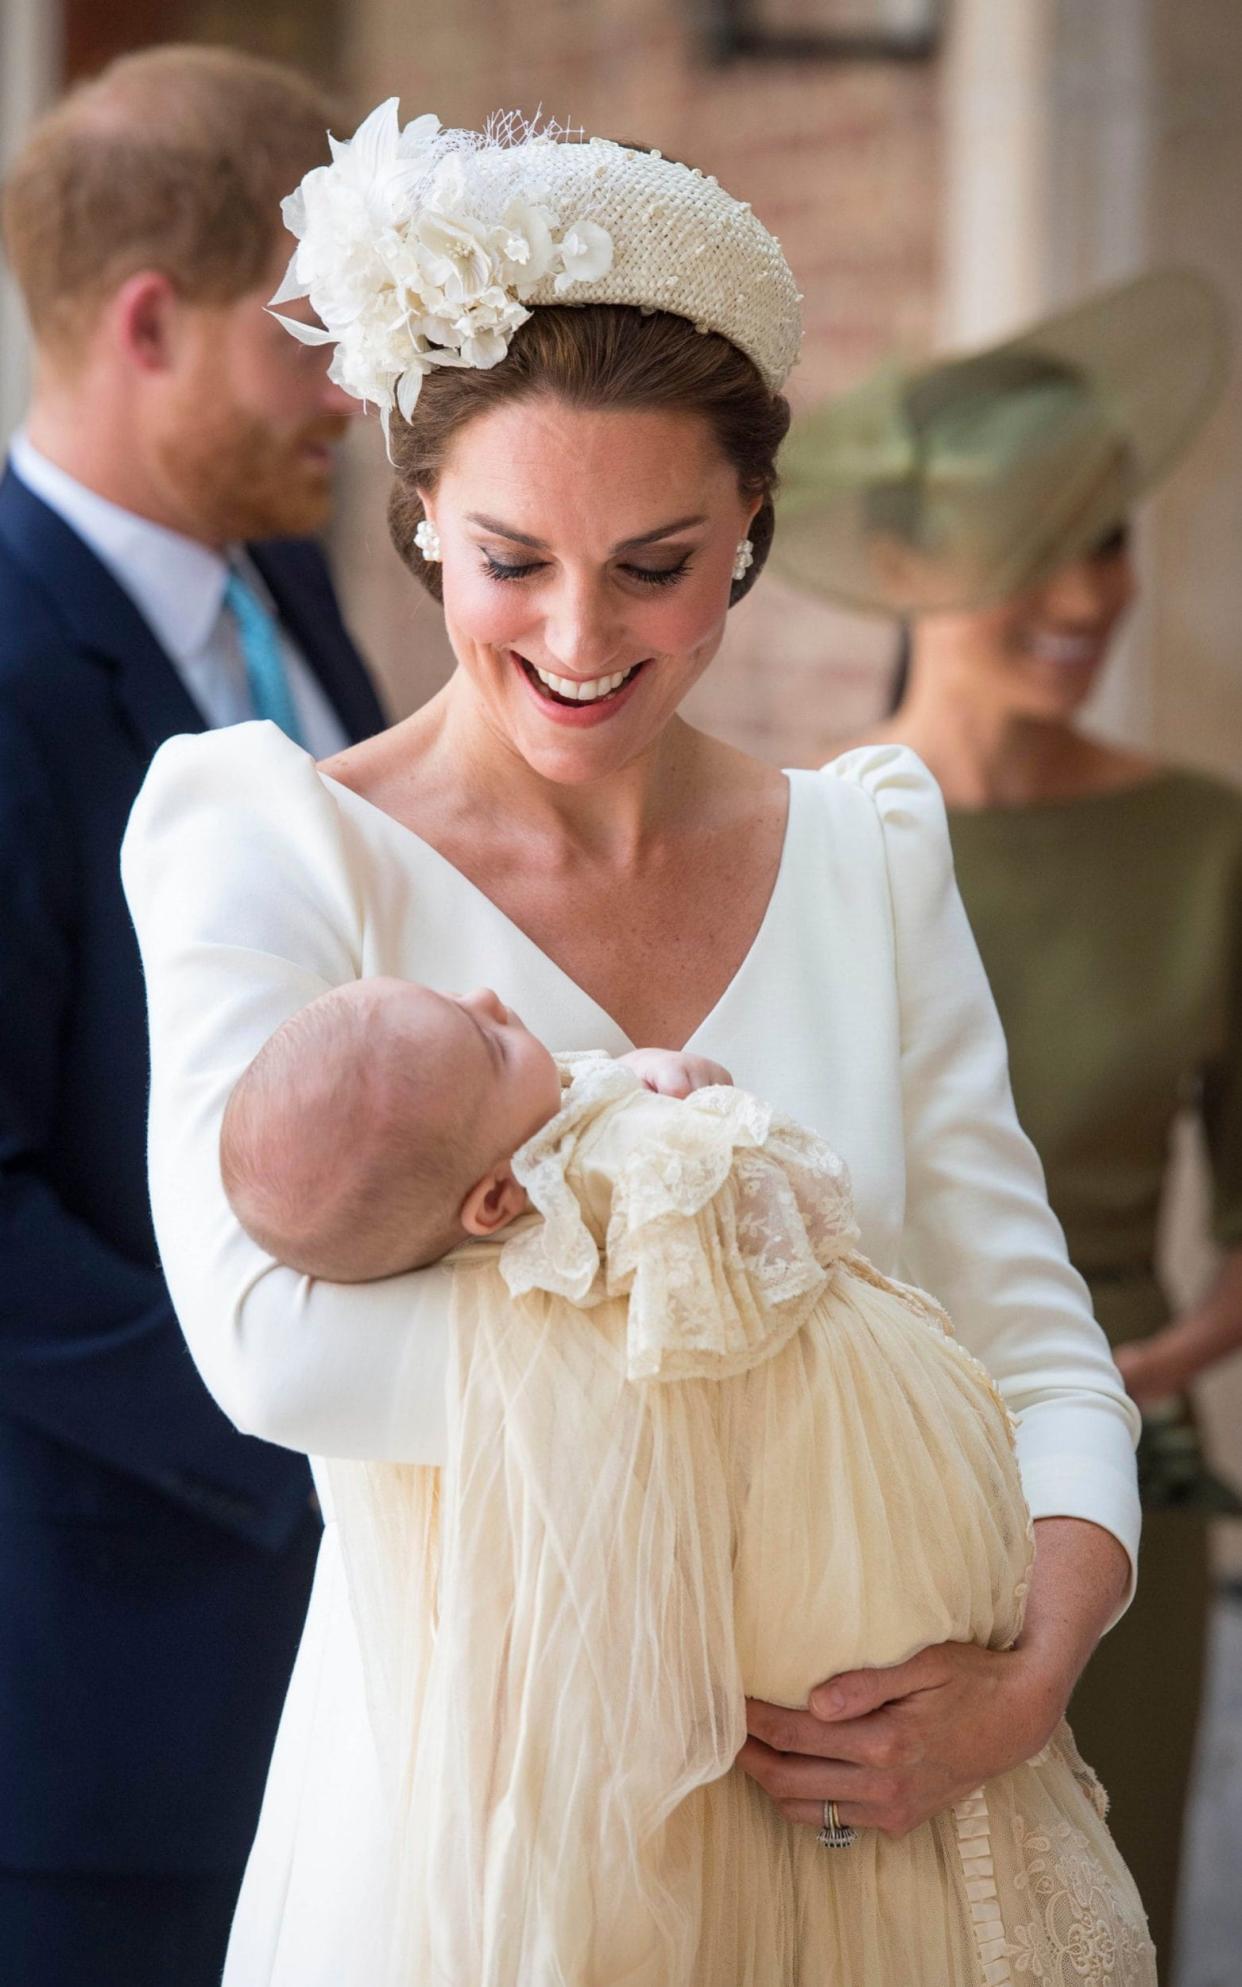 Catherine, Duchess of Cambridge carries Prince Louis as they arrive for his christening service at the Chapel Royal, St James's Palace, in London on Monday 9th July - PA POOL